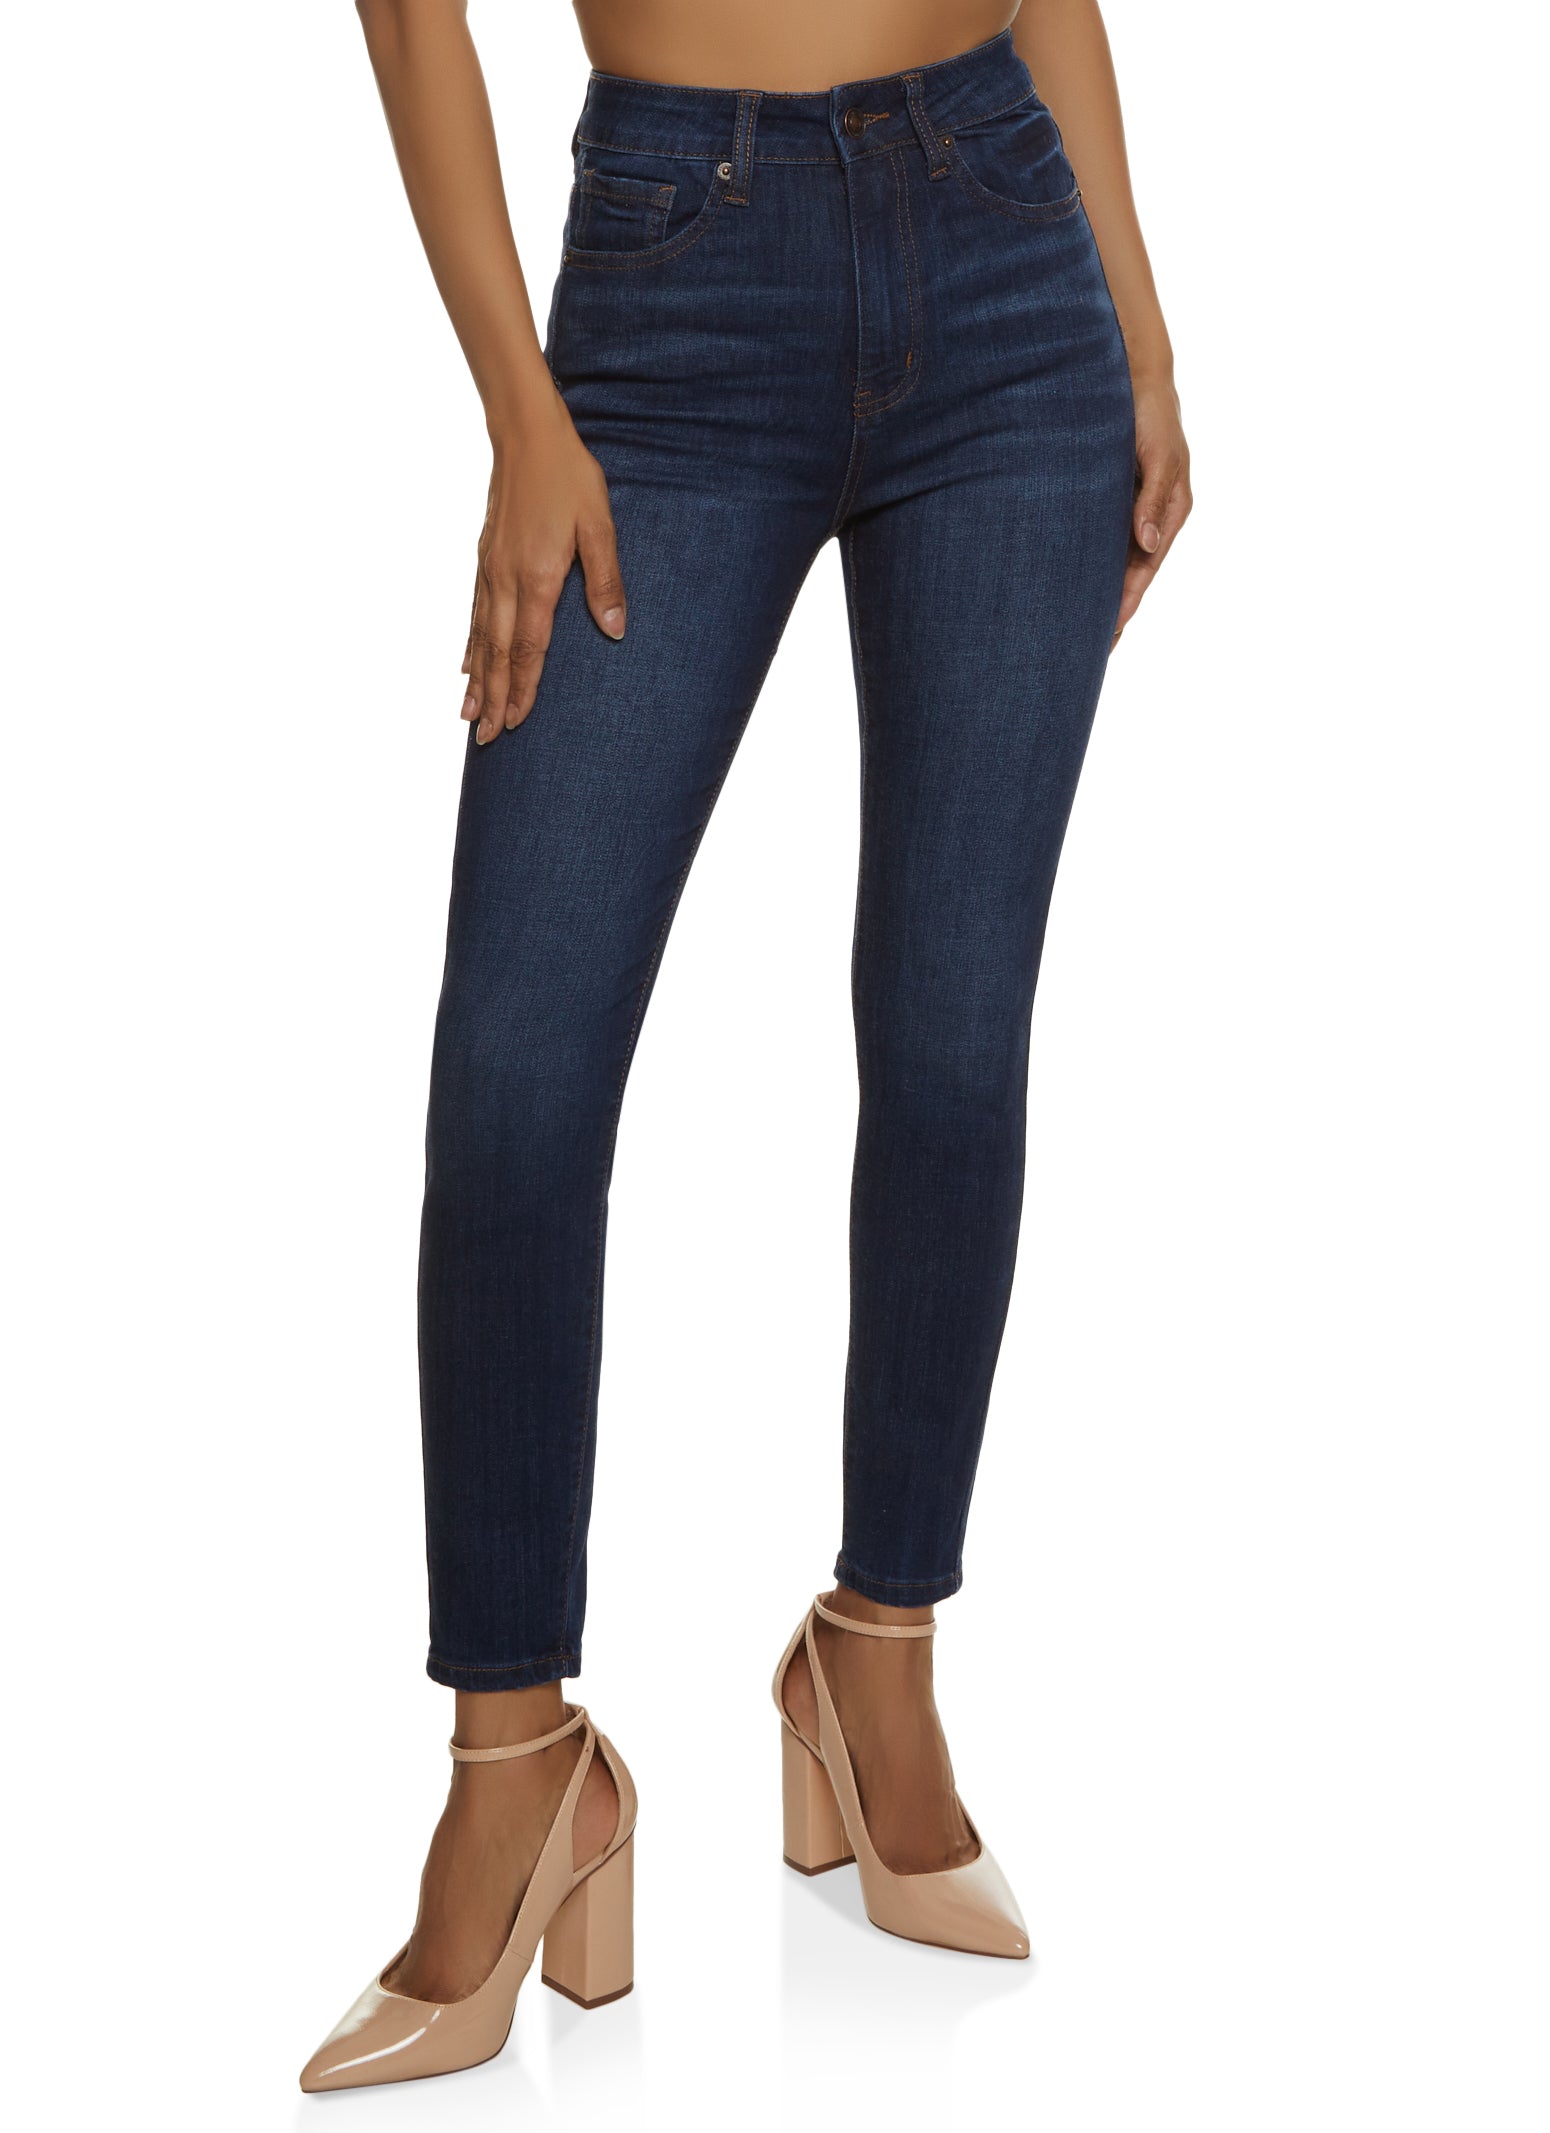 Womens Jeans for Women, Everyday Low Prices